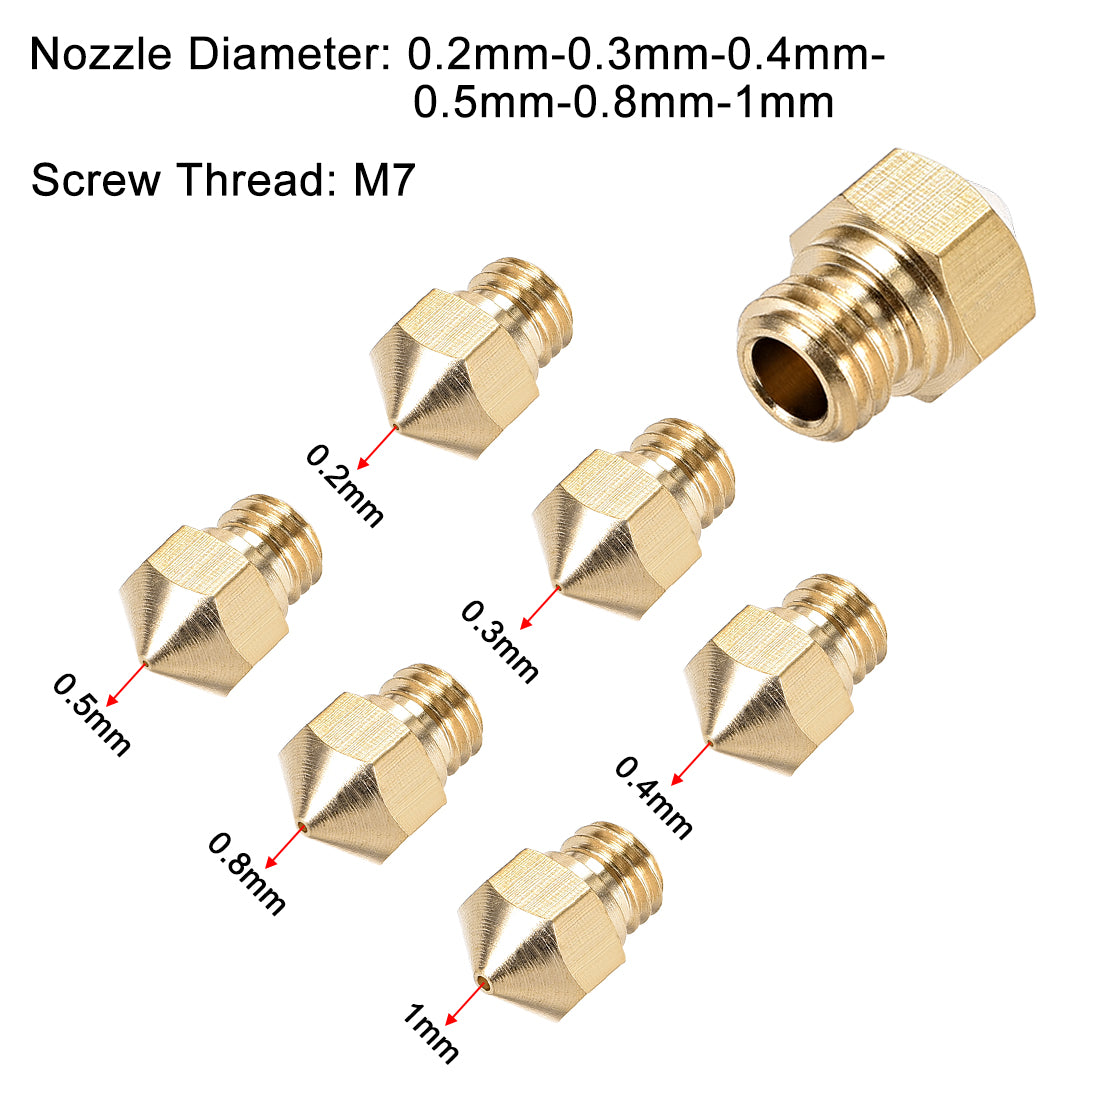 uxcell Uxcell 3D Printer Nozzle Fit for MK10, for 1.75mm Filament Brass,0.2mm - 1mm Total 6pcs